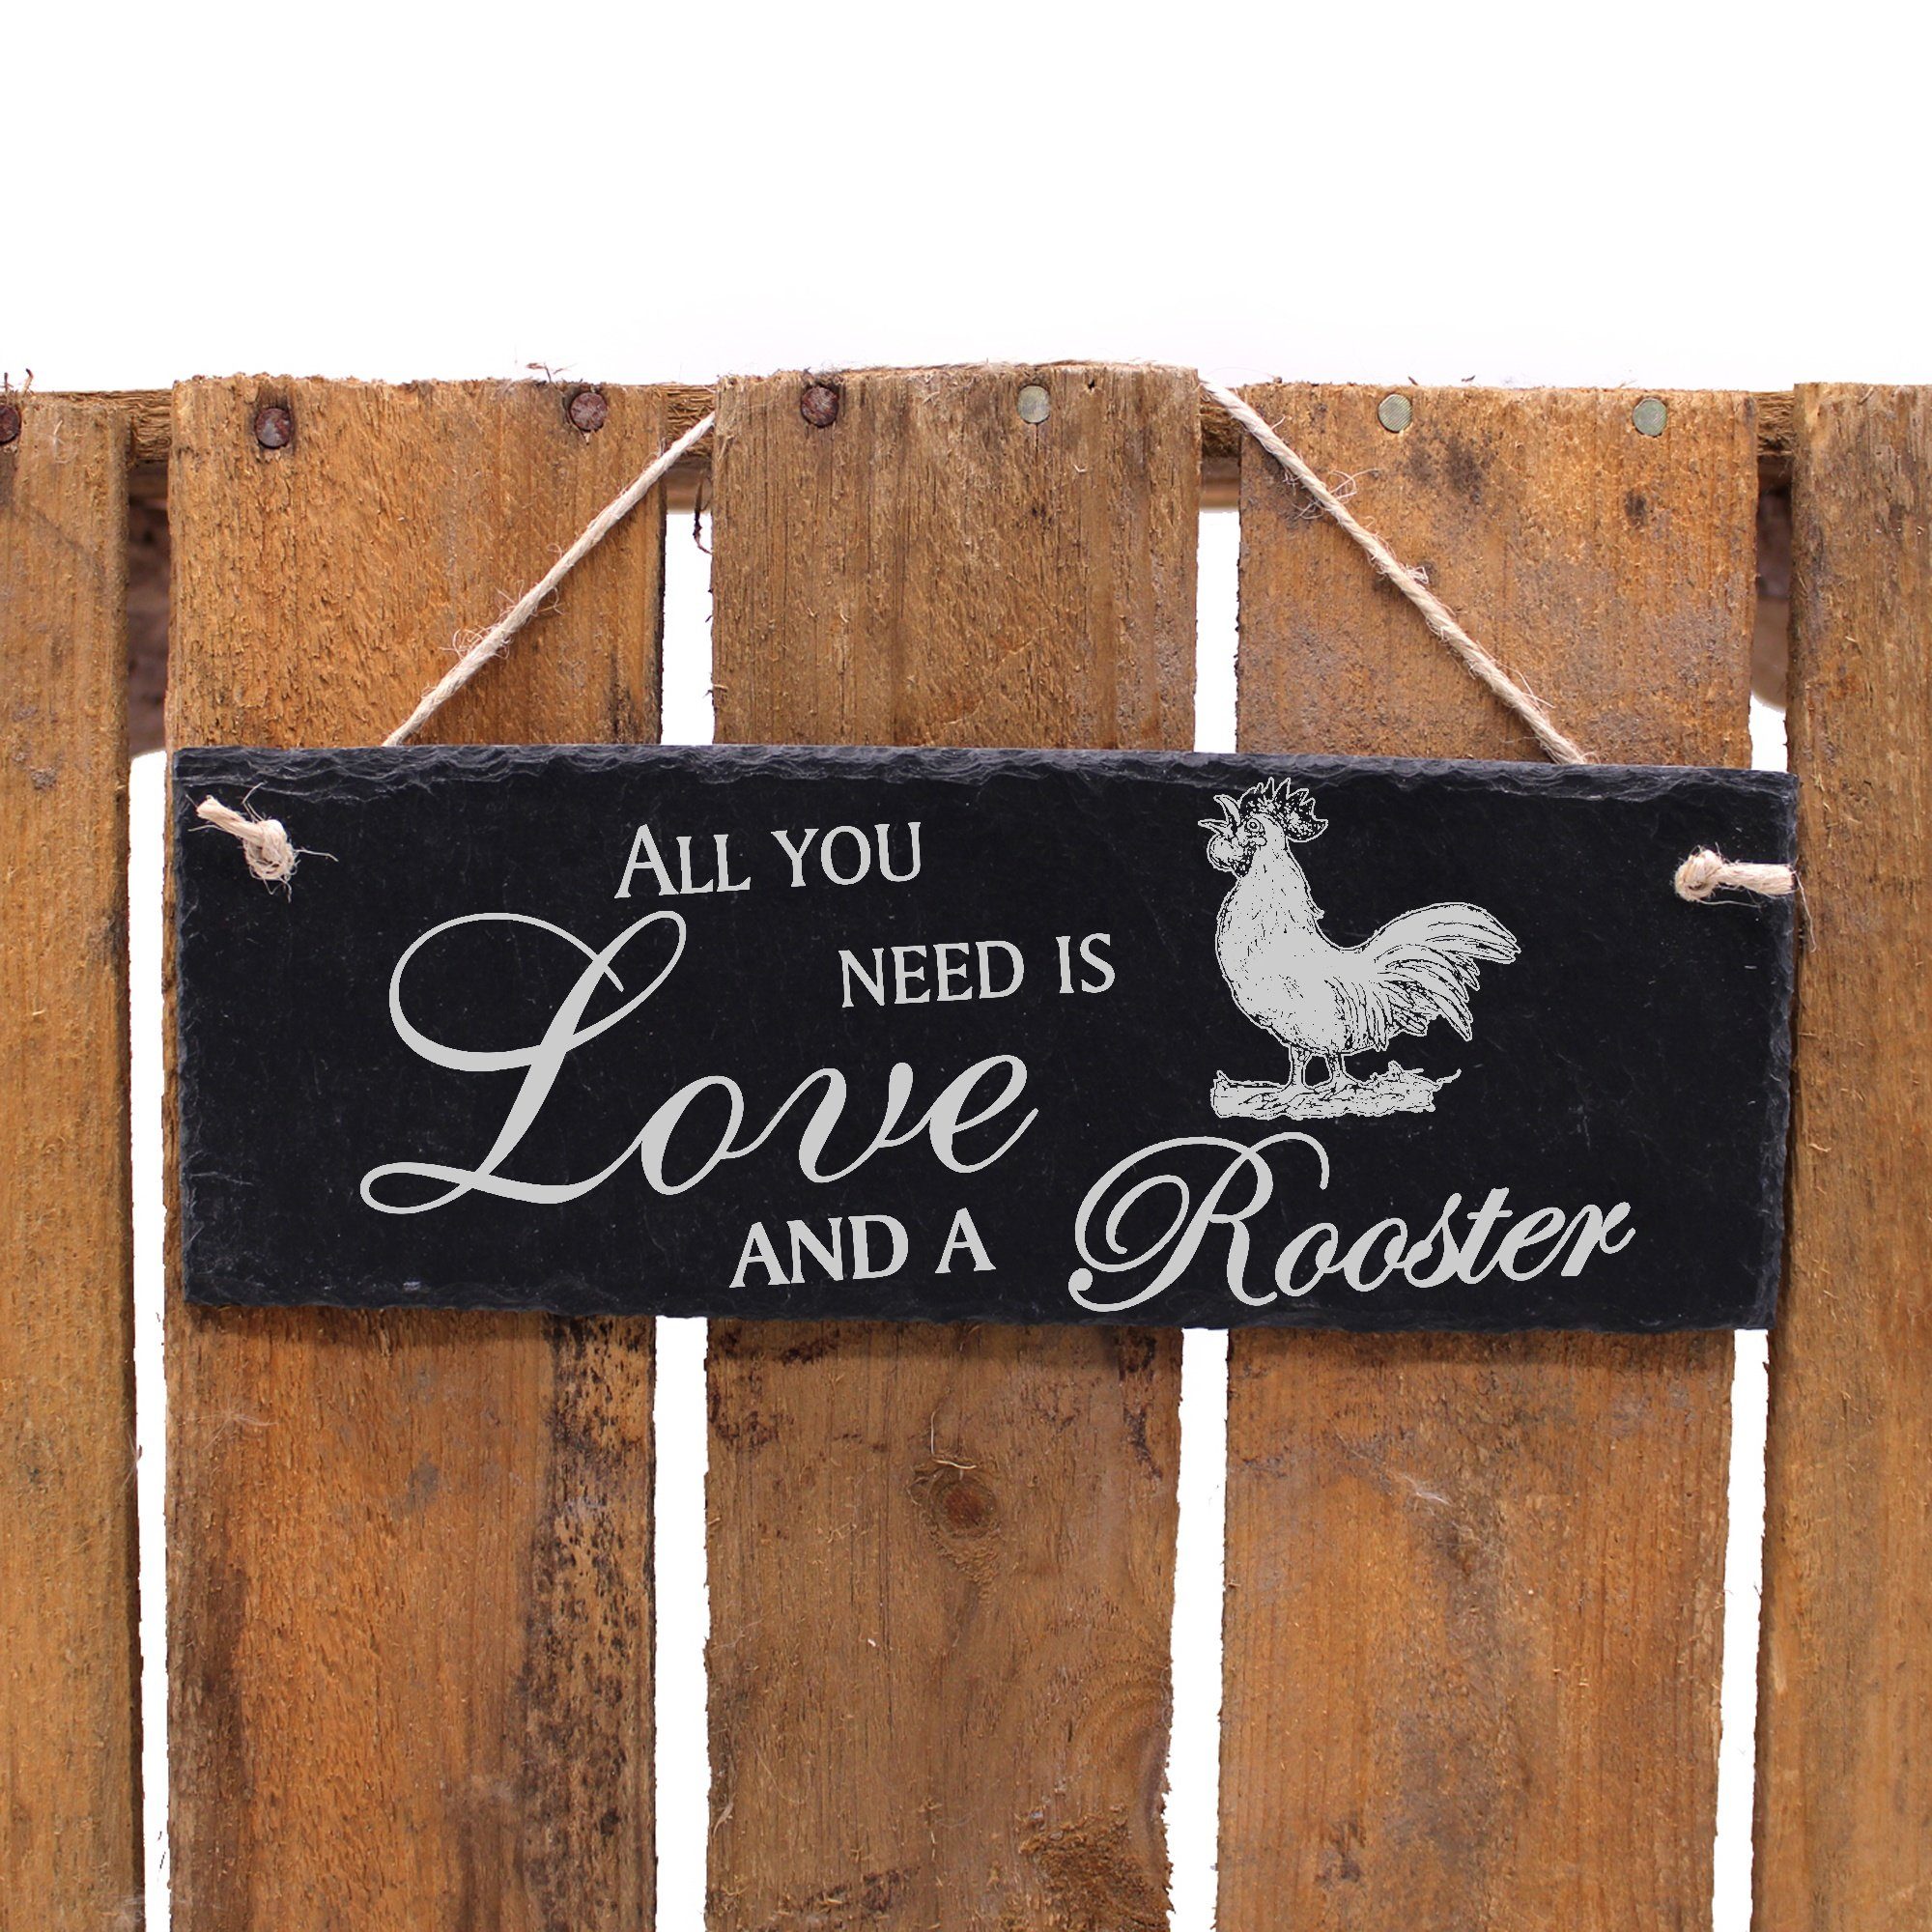 Hängedekoration All a and Dekolando need 22x8cm is Love you Hahn Rooster